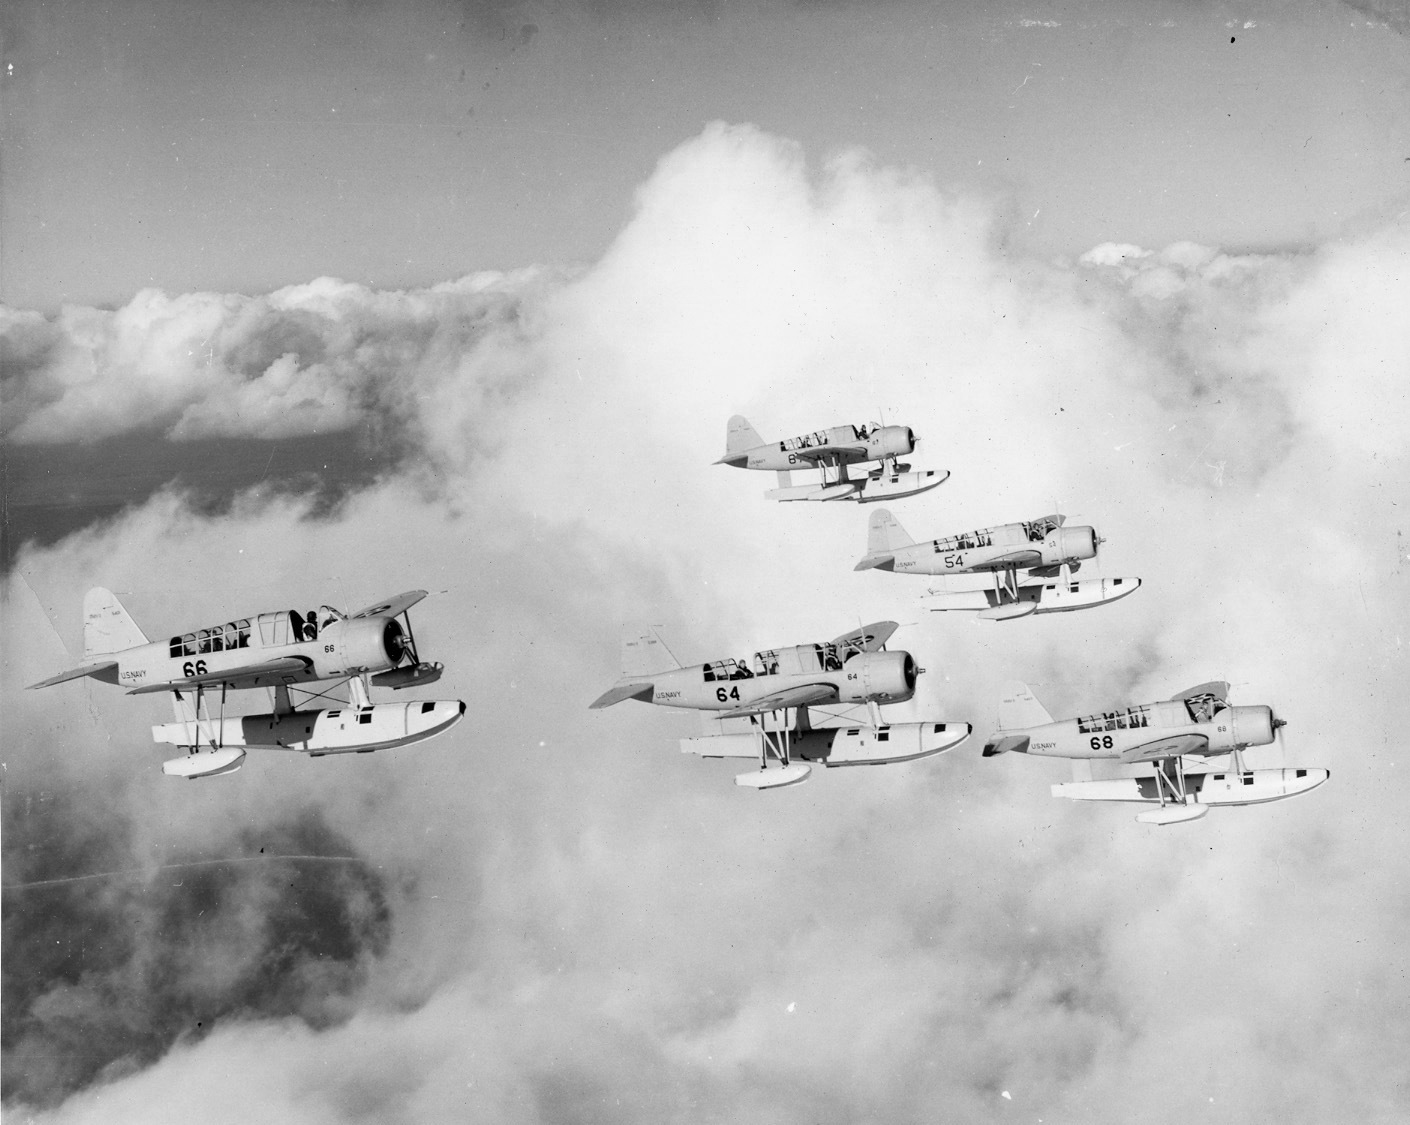 Naval Aviation Cadets from the Naval Air Station at Corpus Christi practicing formation flying in Chance-Vought OS2U Kingfisher float aircraft, Texas, United States, circa early 1940.